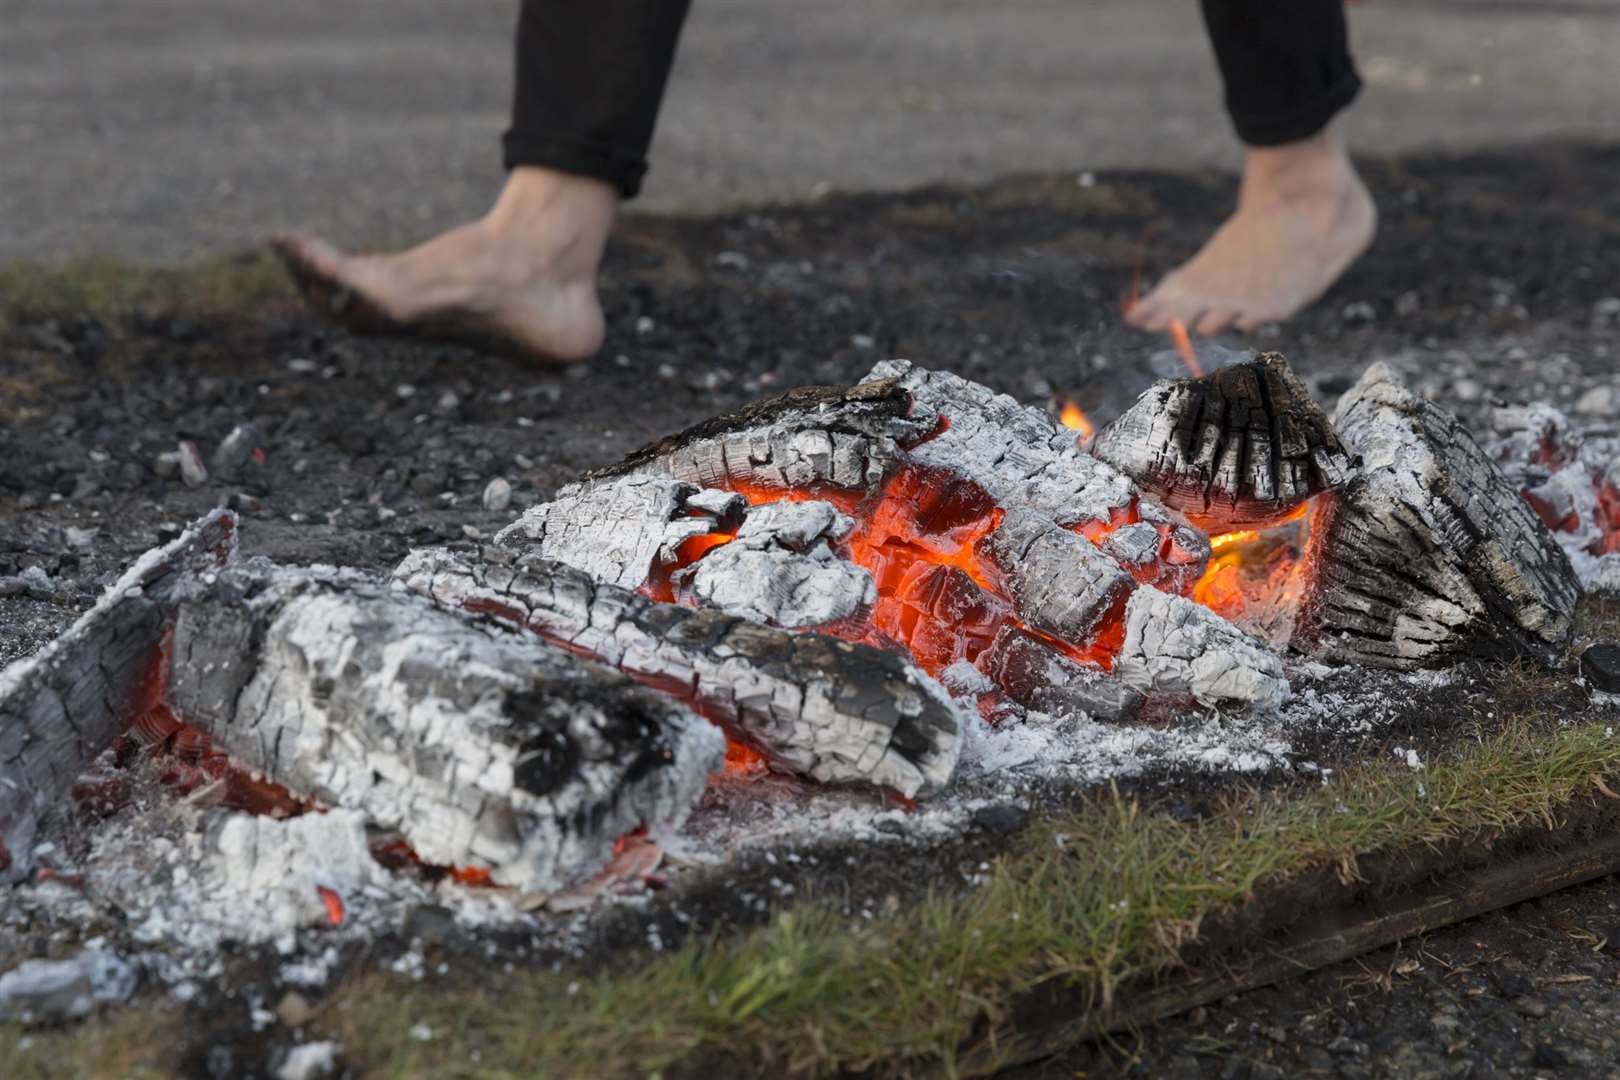 The firewalk takes place on Sunday, September 29